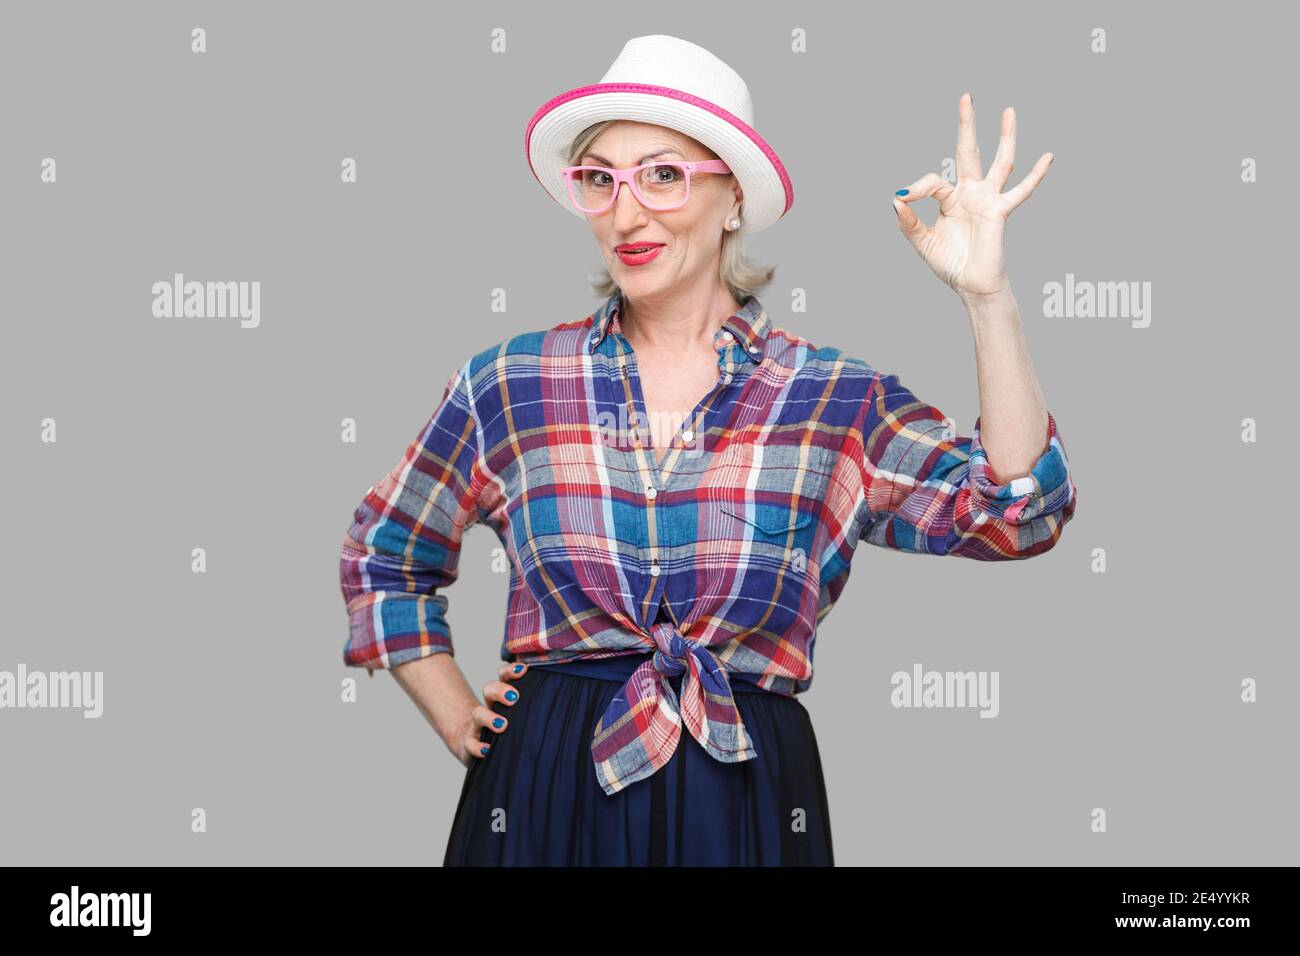 Portrait of funny happy modern cute stylish mature woman in casual style with hat and eyeglasses standing with Ok sign and looking at camera smiling. Stock Photo